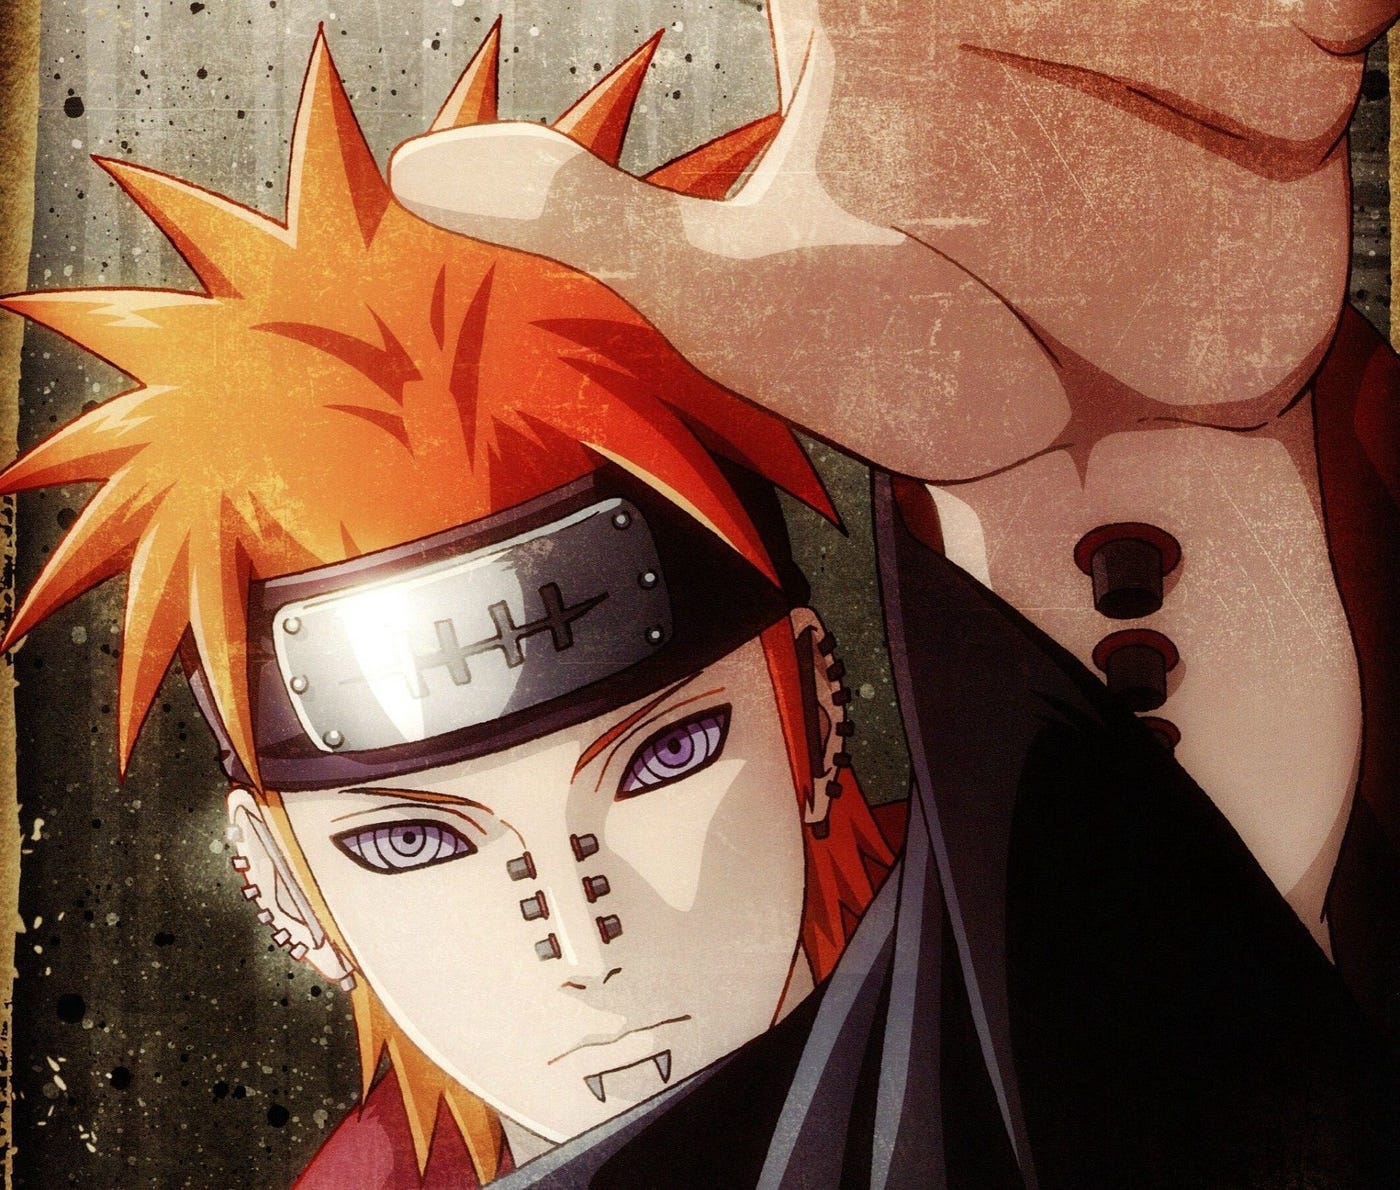 Why Pain Is Naruto's Best Villain